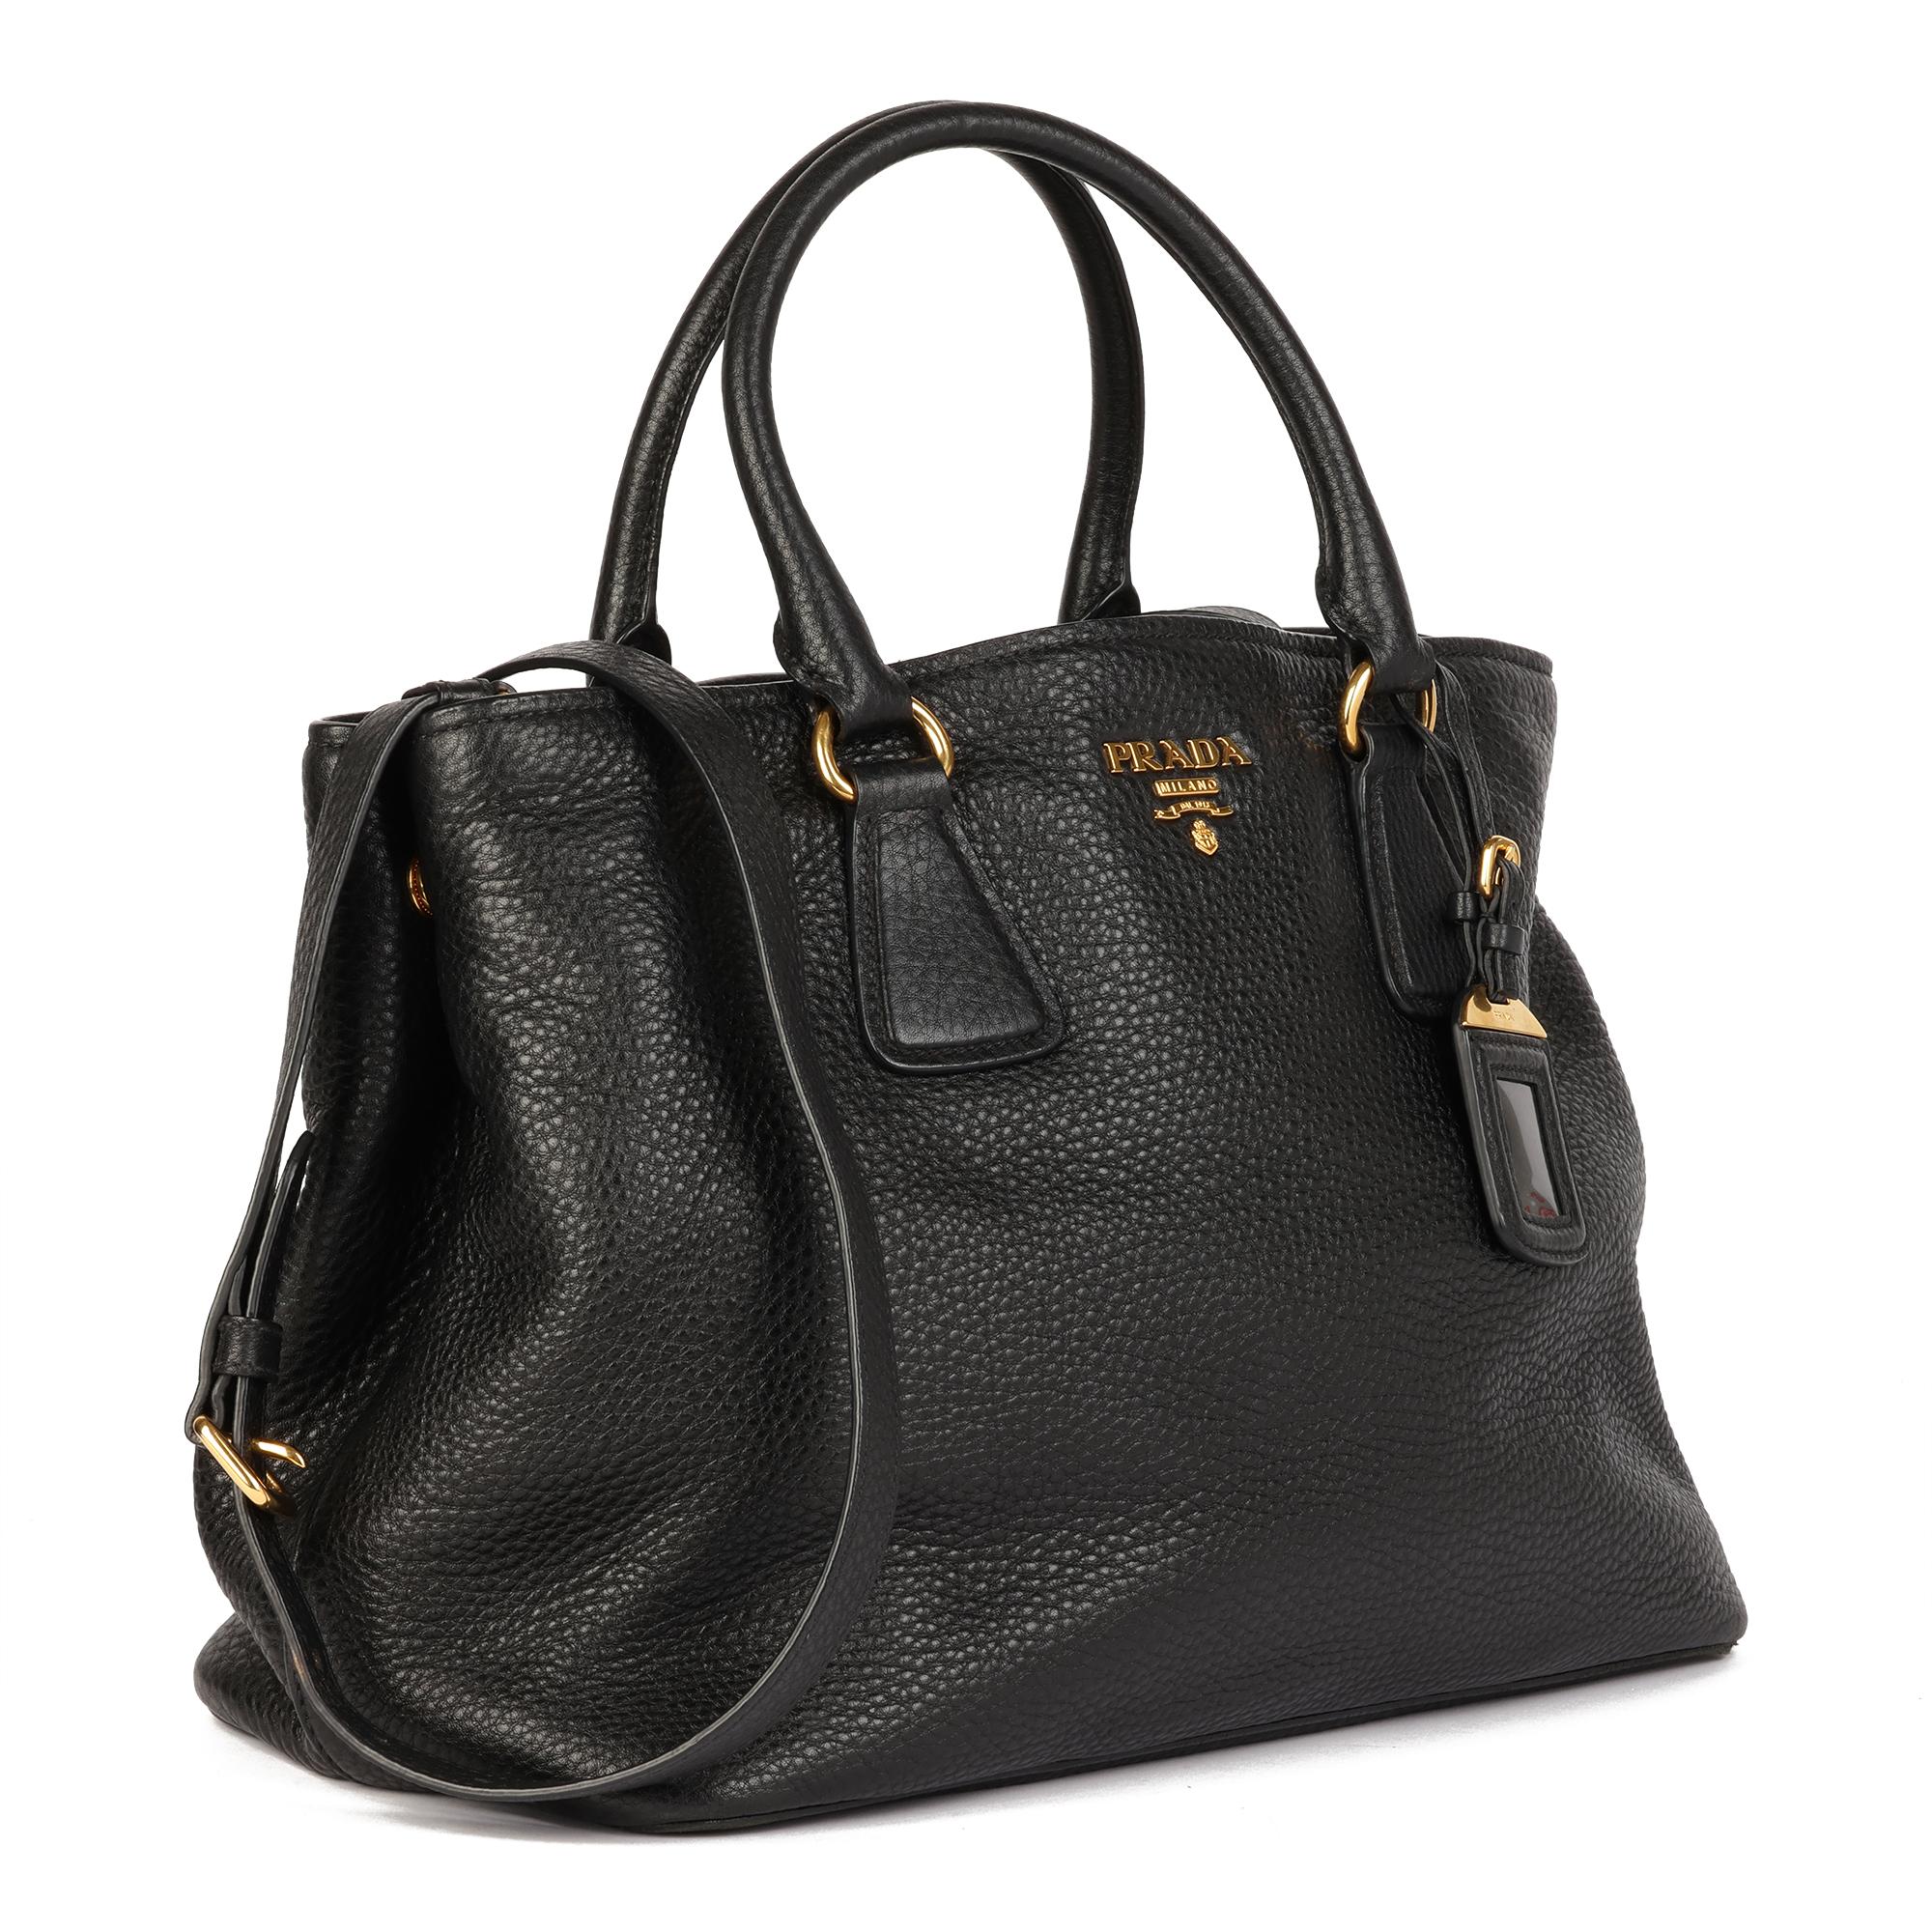 PRADA
Black Grained Calfskin Leather Vitello Daino Tote 

Serial Number: 173
Age (Circa): 2012
Accompanied By: Shoulder Strap, Authenticity Card
Authenticity Details: Serial Tag (Made in Italy)
Gender: Ladies
Type: Tote, Shoulder, Crossbody

Colour: